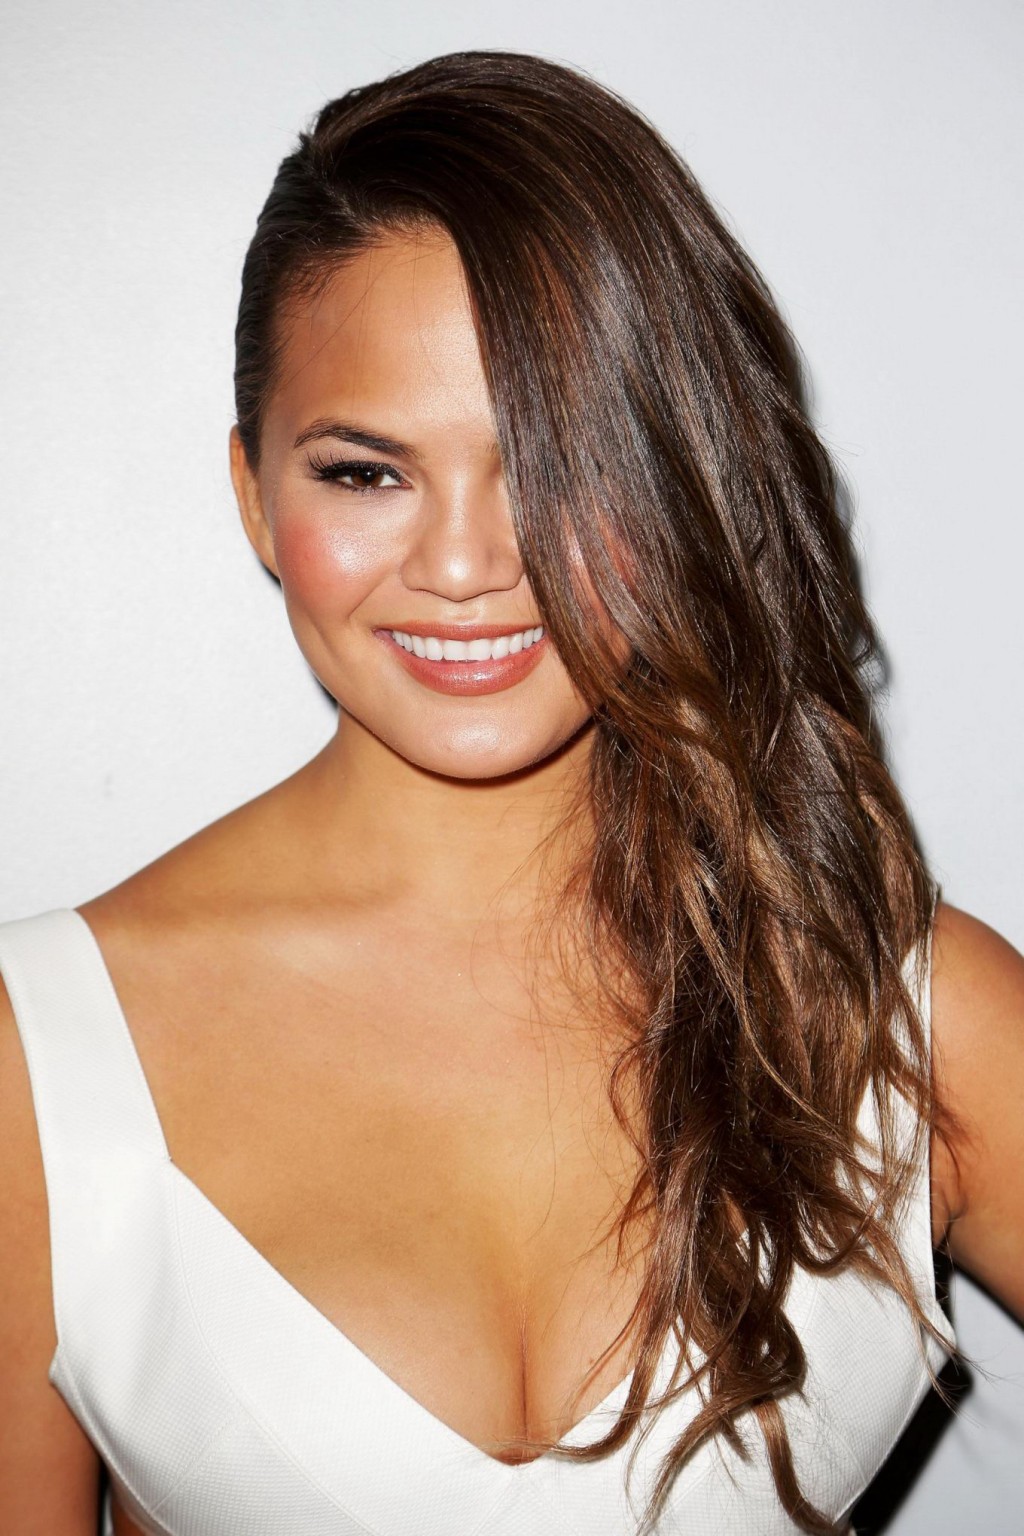 Chrissy Teigen showing huge cleavage at the Beach Bunny fashion show in Miami #75223893